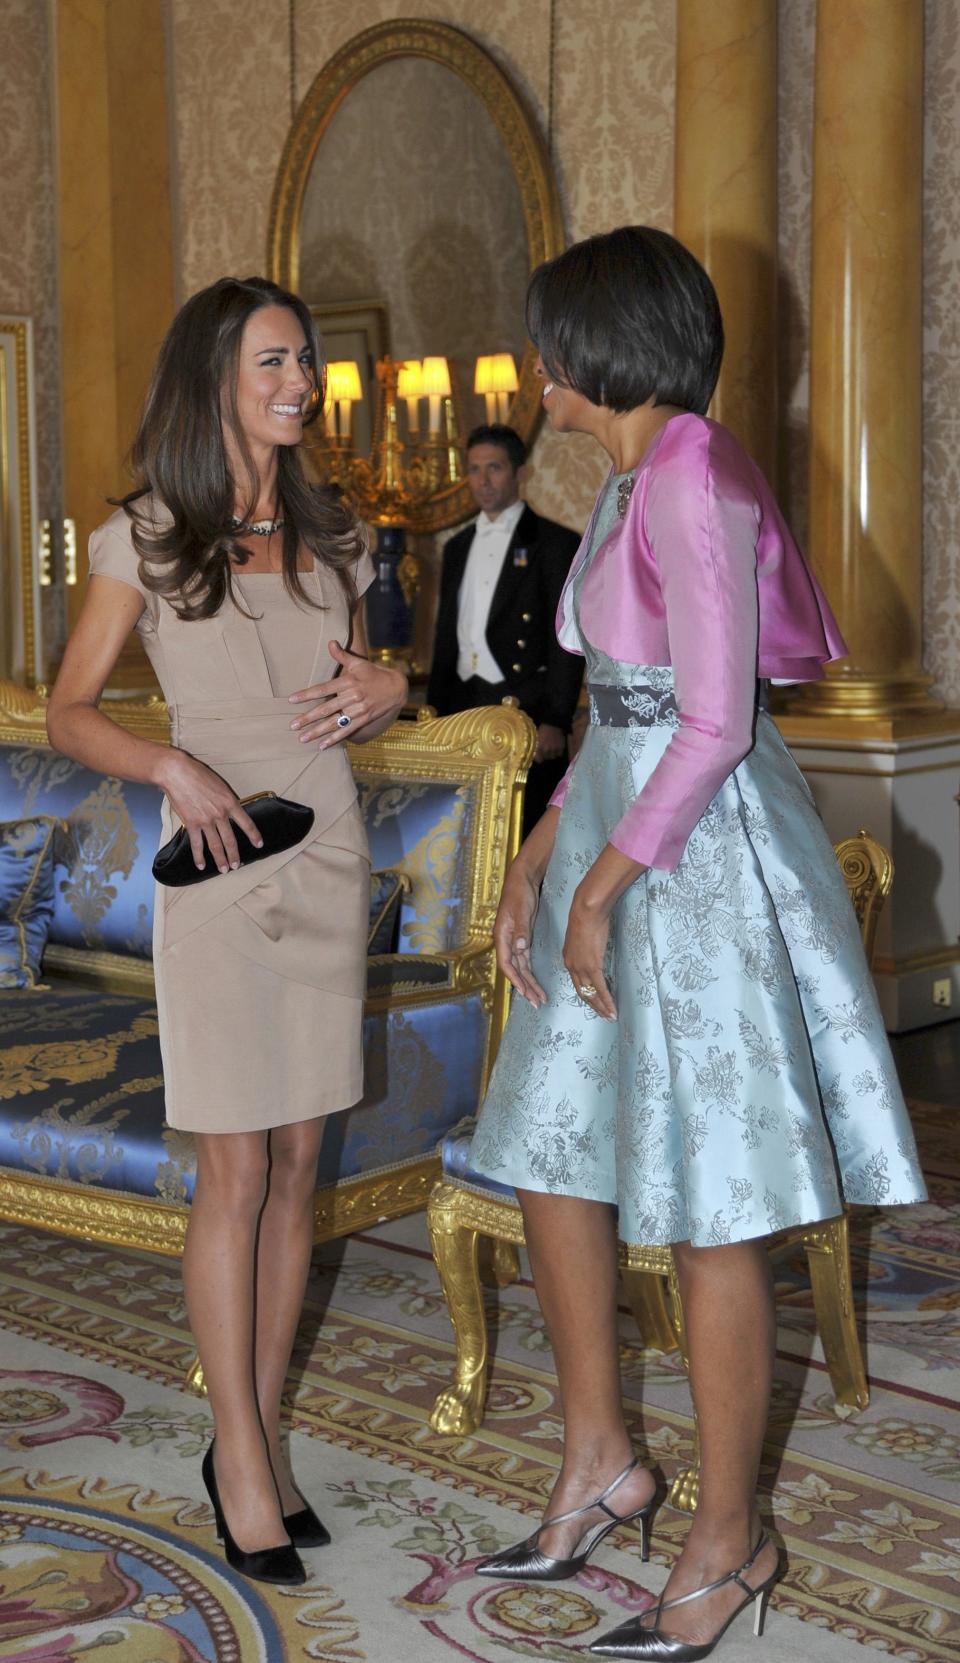 First Lady Michelle Obama greets hosed-up Kate on a visit to Buckingham Palace